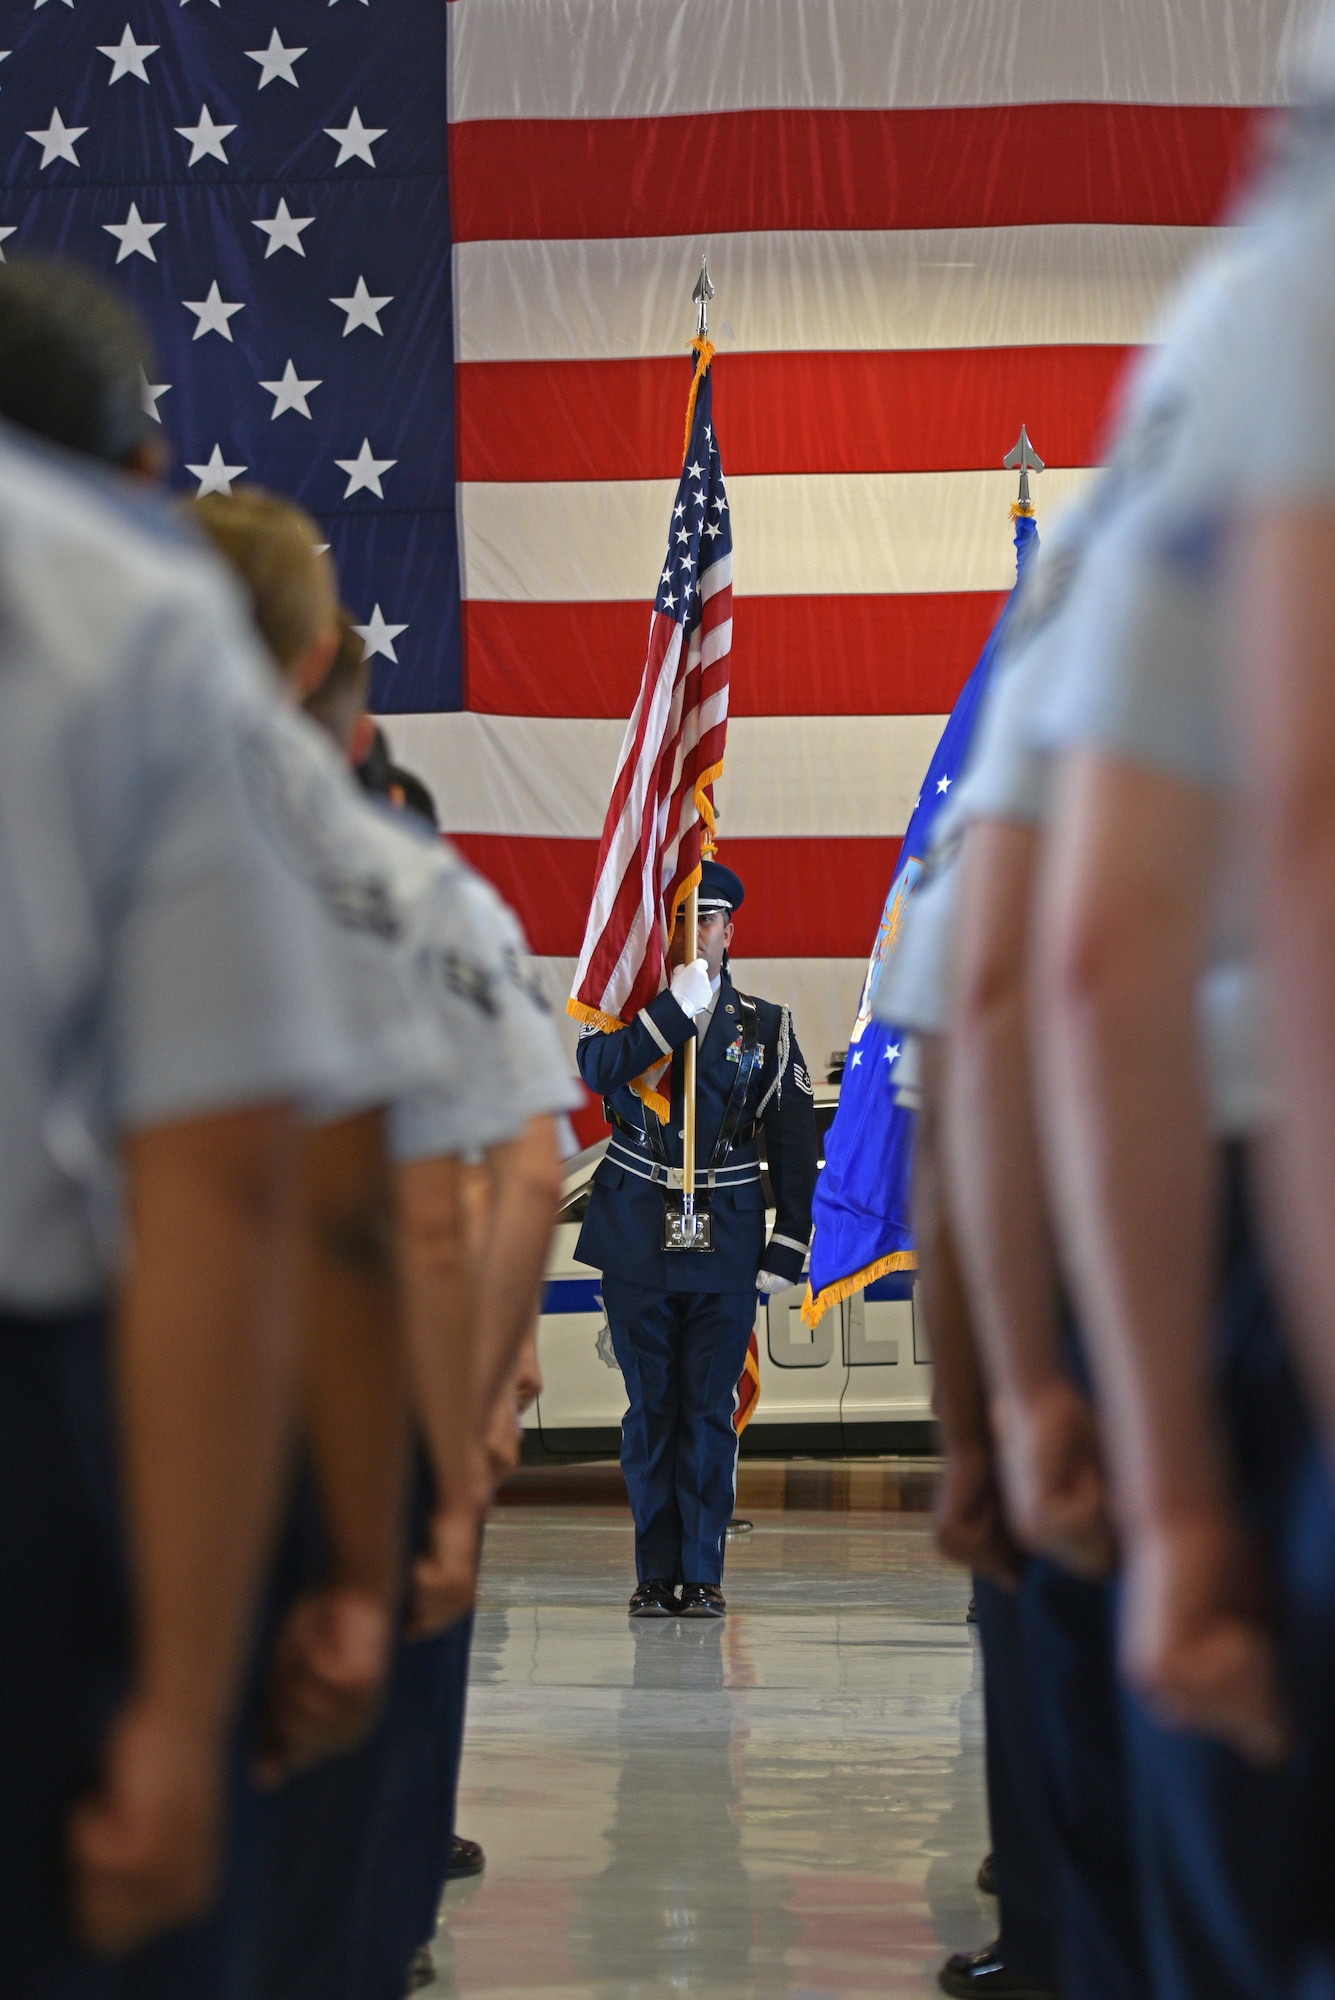 The Goodfellow Air Force Base Color Guard presents the U.S. National Colors during the change of command ceremony at the 17th Logistics Readiness Squadron Vehicle Bay on Goodfellow Air Force Base, Texas, June 23, 2021. The primary purpose of the Color Guard is to present the National Colors during official ceremonies. (U.S. Air Force photo by Senior Airman Ashley Thrash)